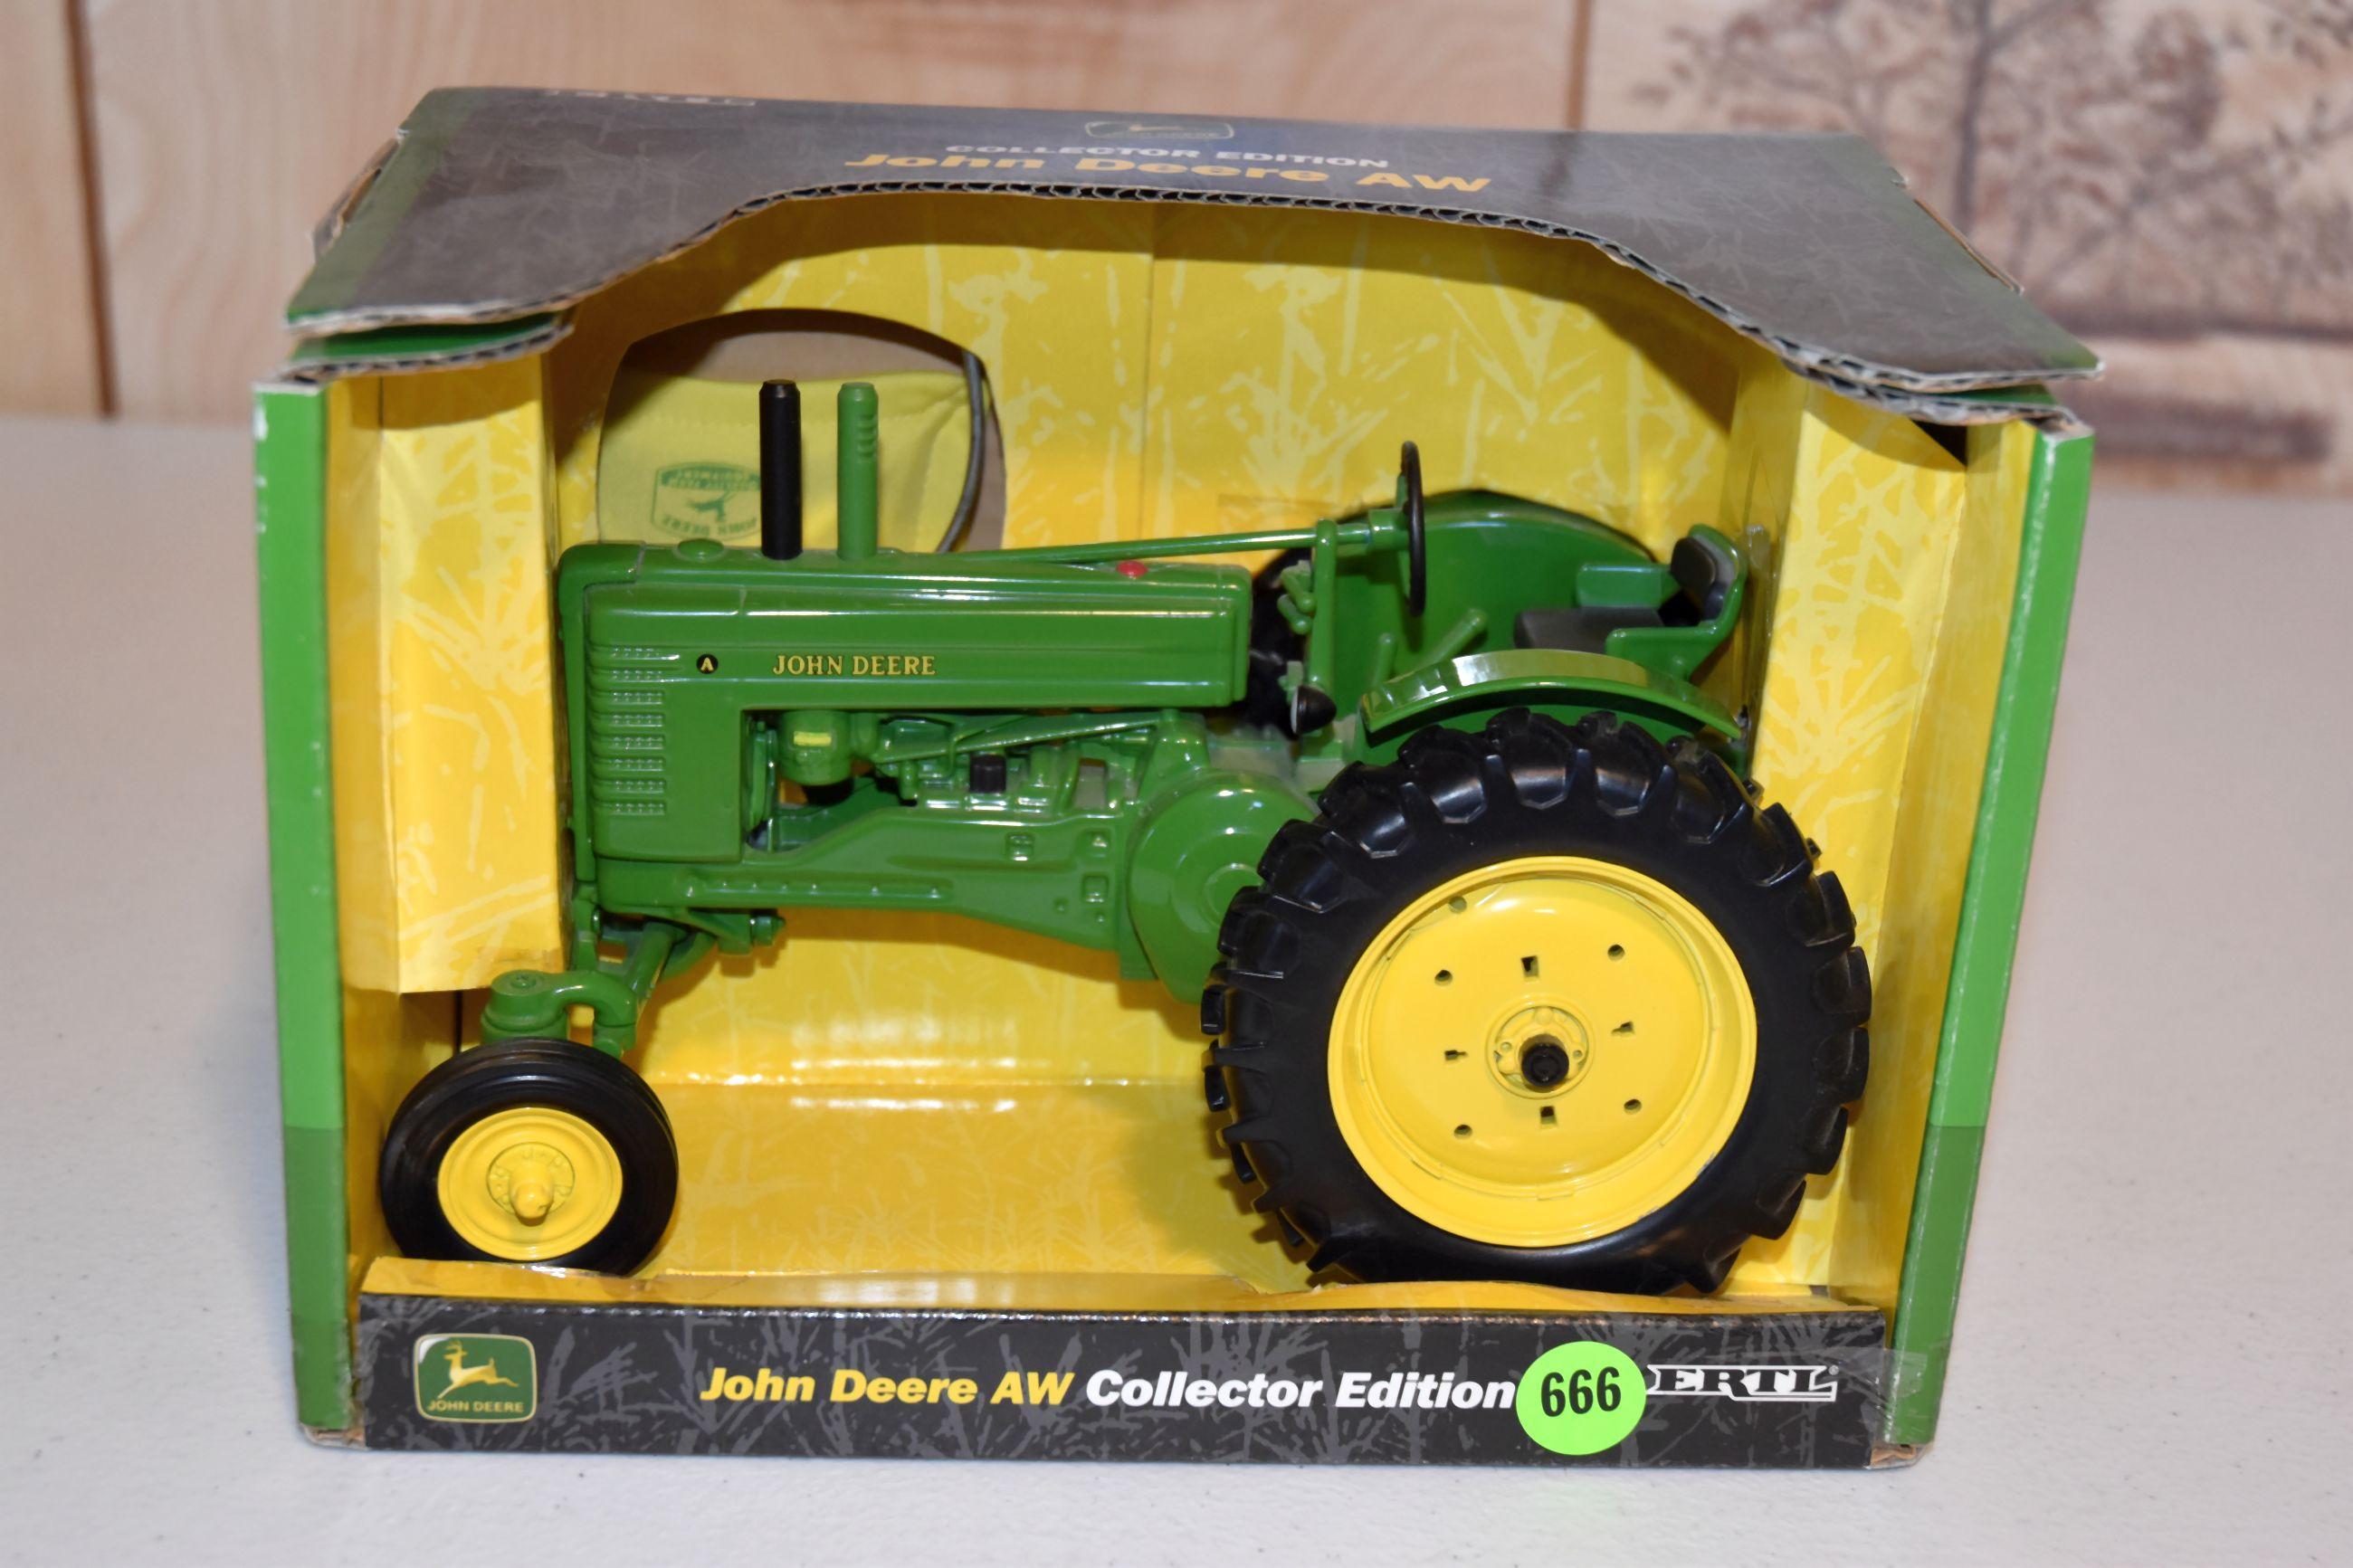 Ertl John Deere AW Collectors Edition, 1/16th Scale, With Box